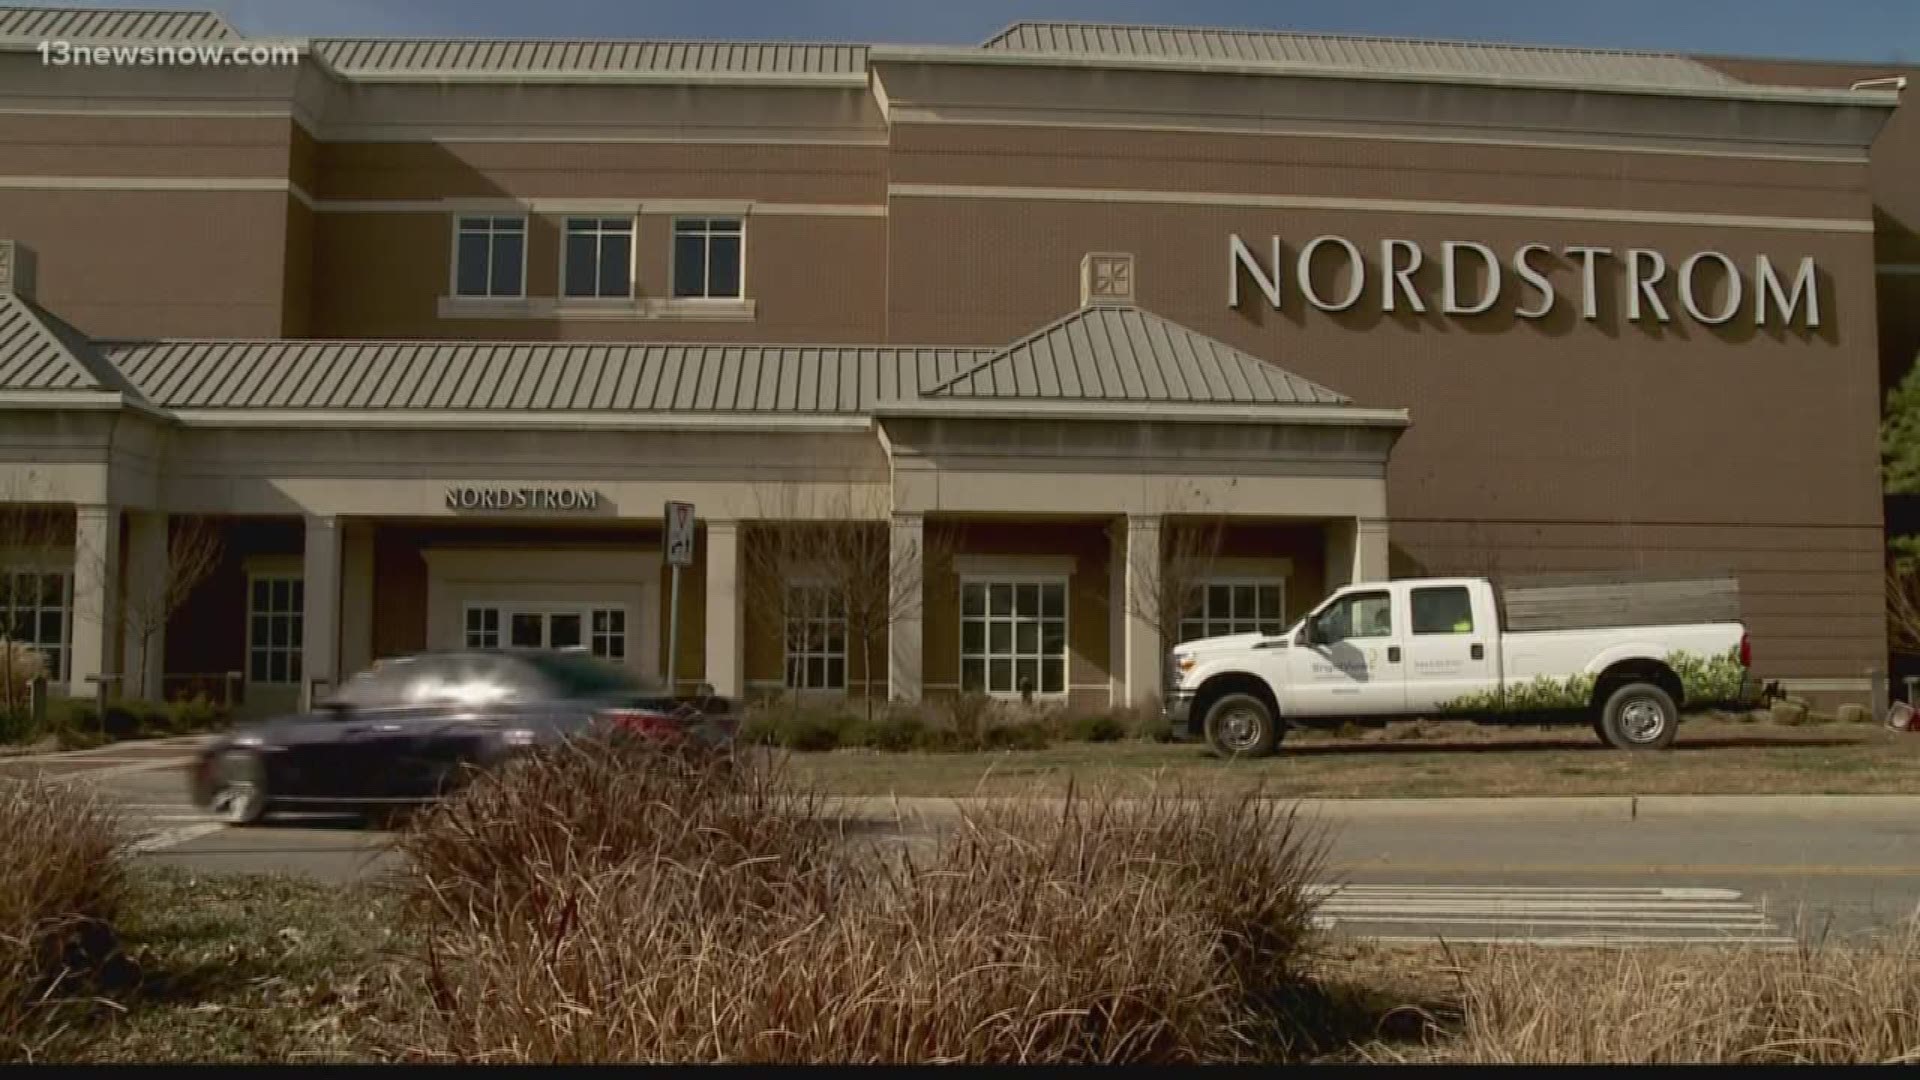 Nordstrom has announced that it will be leaving MacArthur Center on April 5.